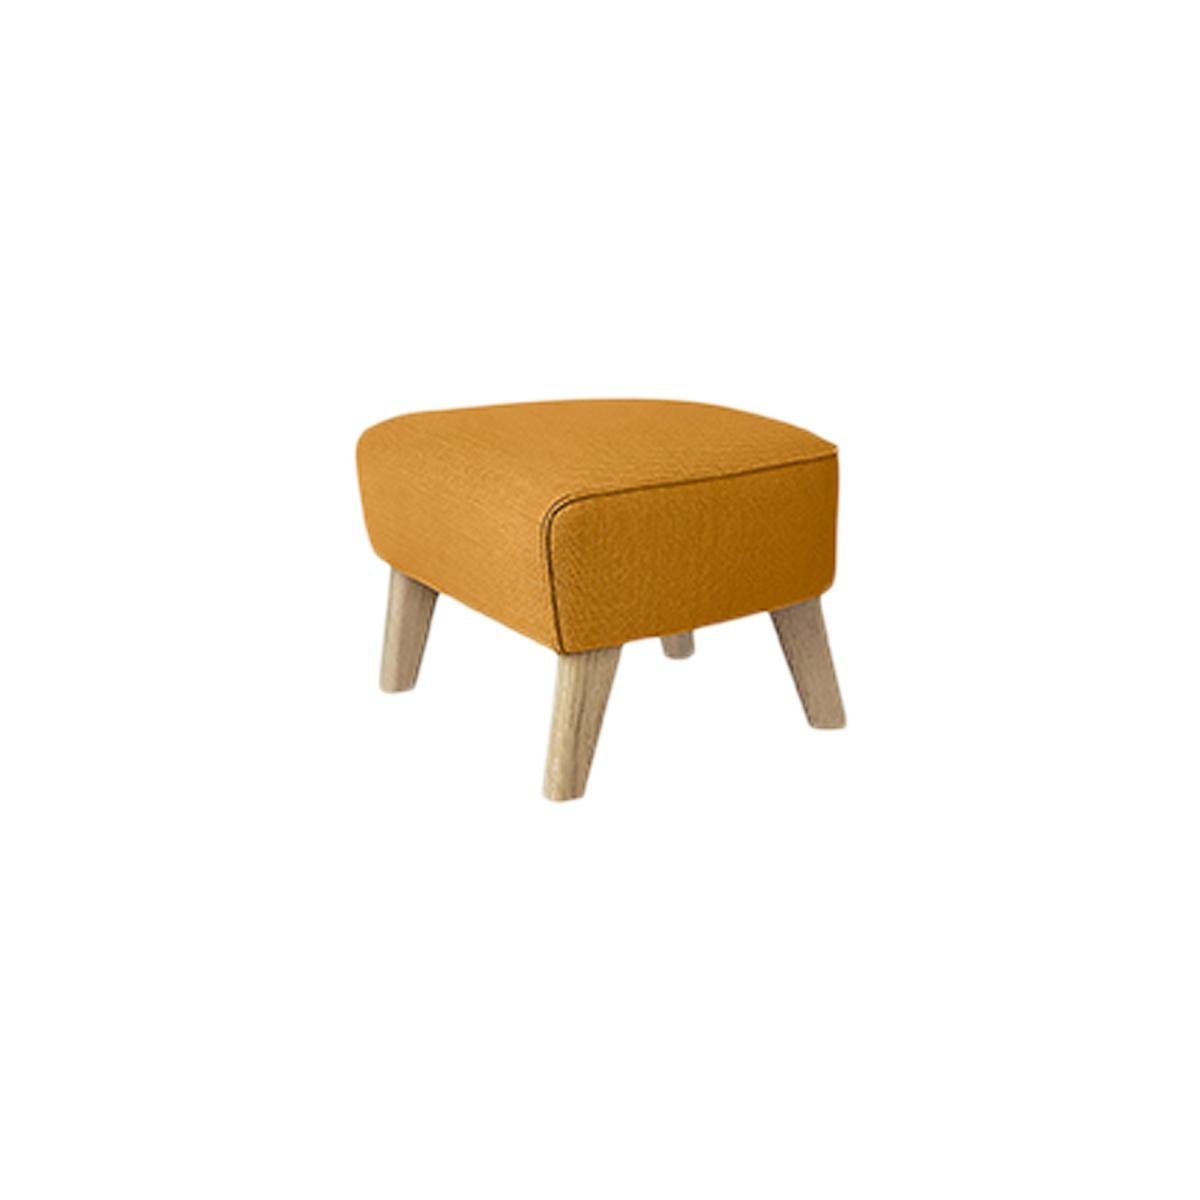 Orange and natural Oak Raf Simons Vidar 3 my own chair footstool by Lassen
Dimensions: W 56 x D 58 x H 40 cm 
Materials: Textile
Also Available: Other colors available.

The My Own Chair Footstool has been designed in the same spirit as